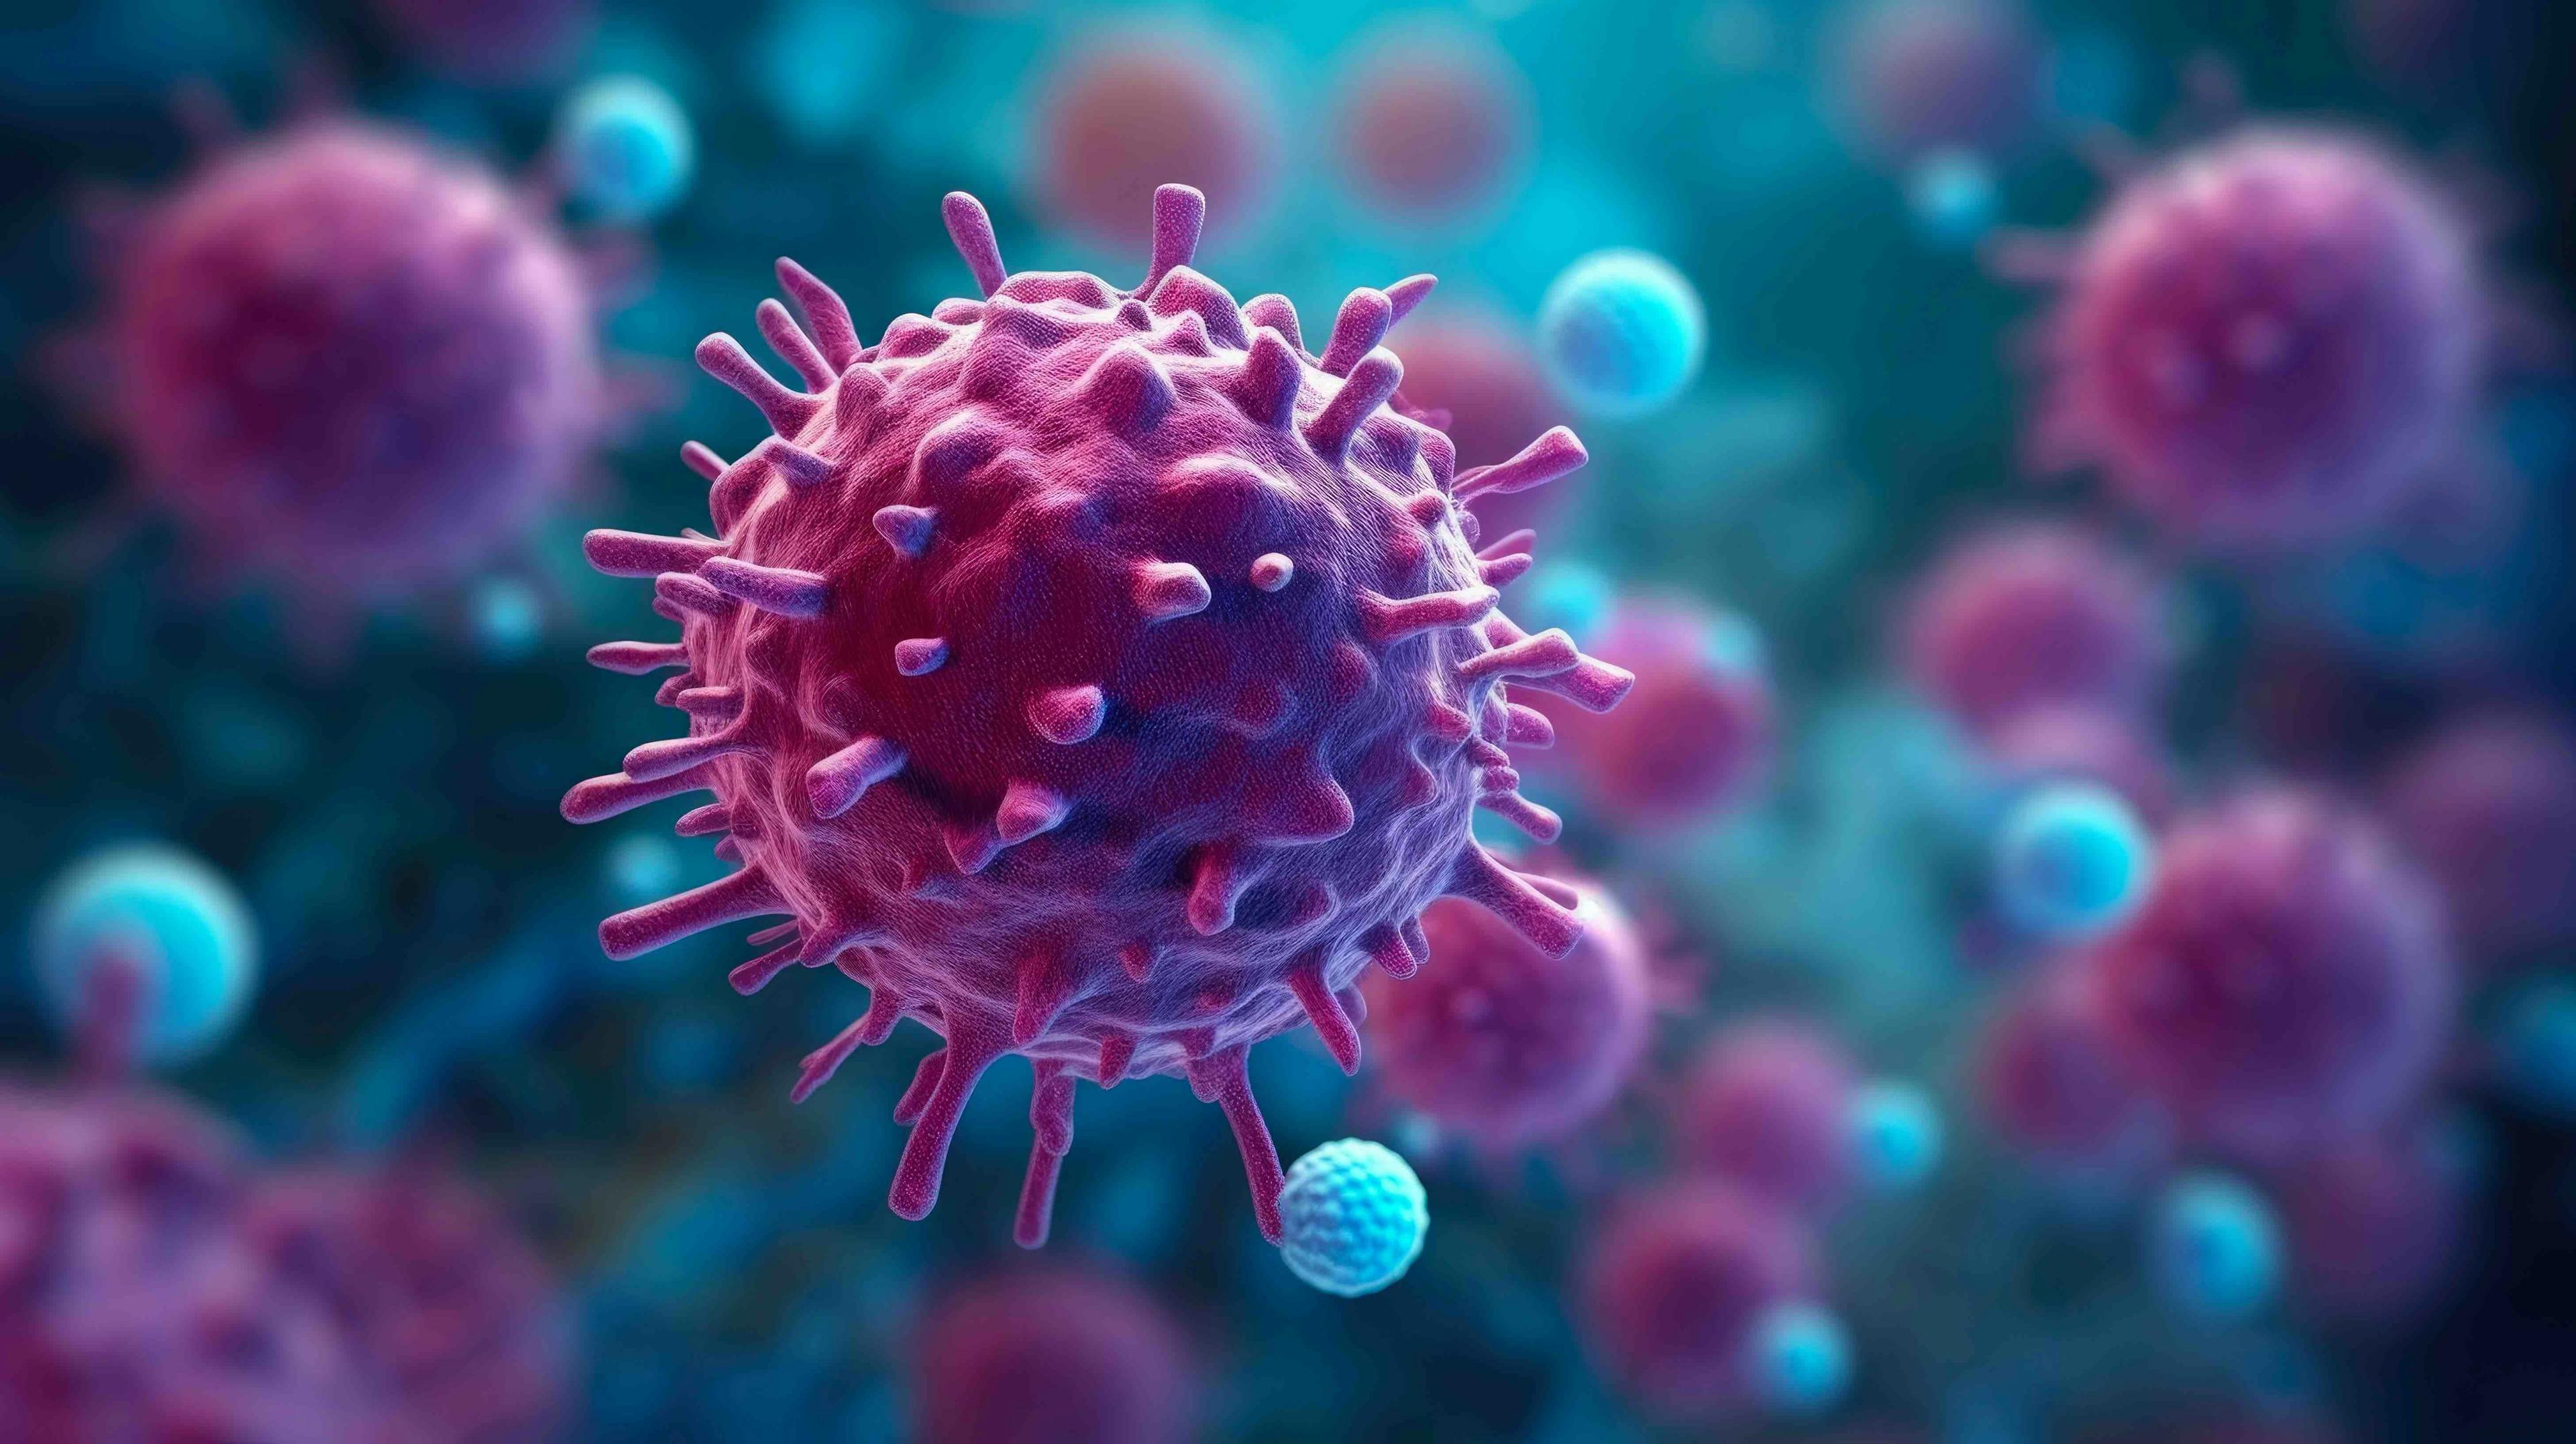 CAR T cell therapy rendering | Image Credit: © AIGen - stock.adobe.com